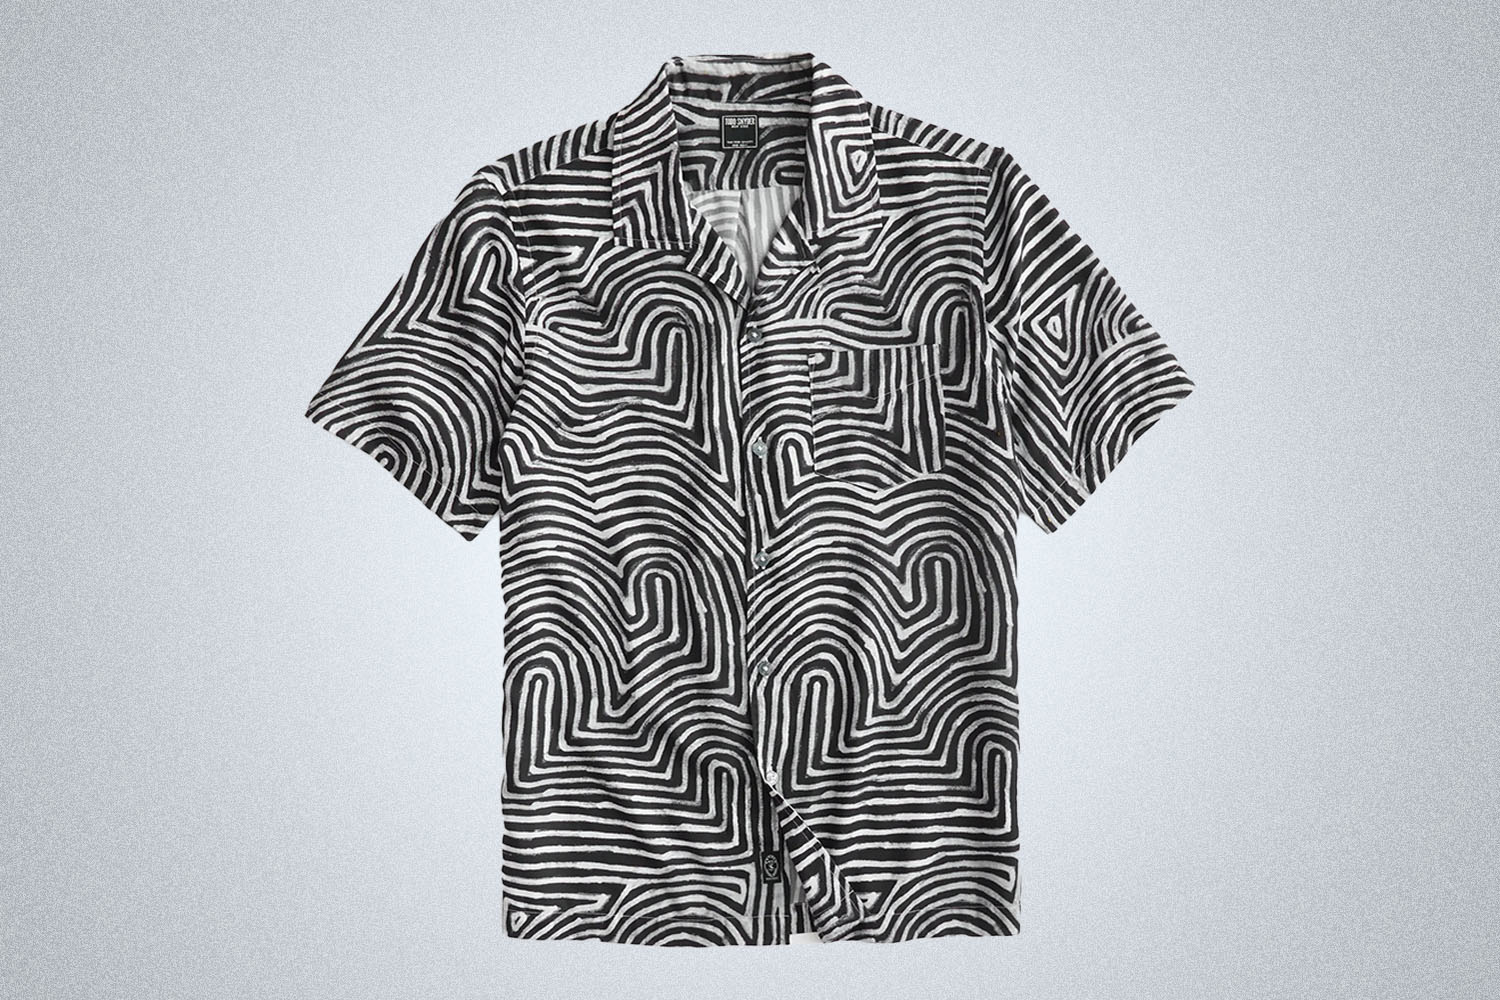 The Waviest Camp Shirt We Could Find: Todd Snyder Maze Camp Collar Shirt